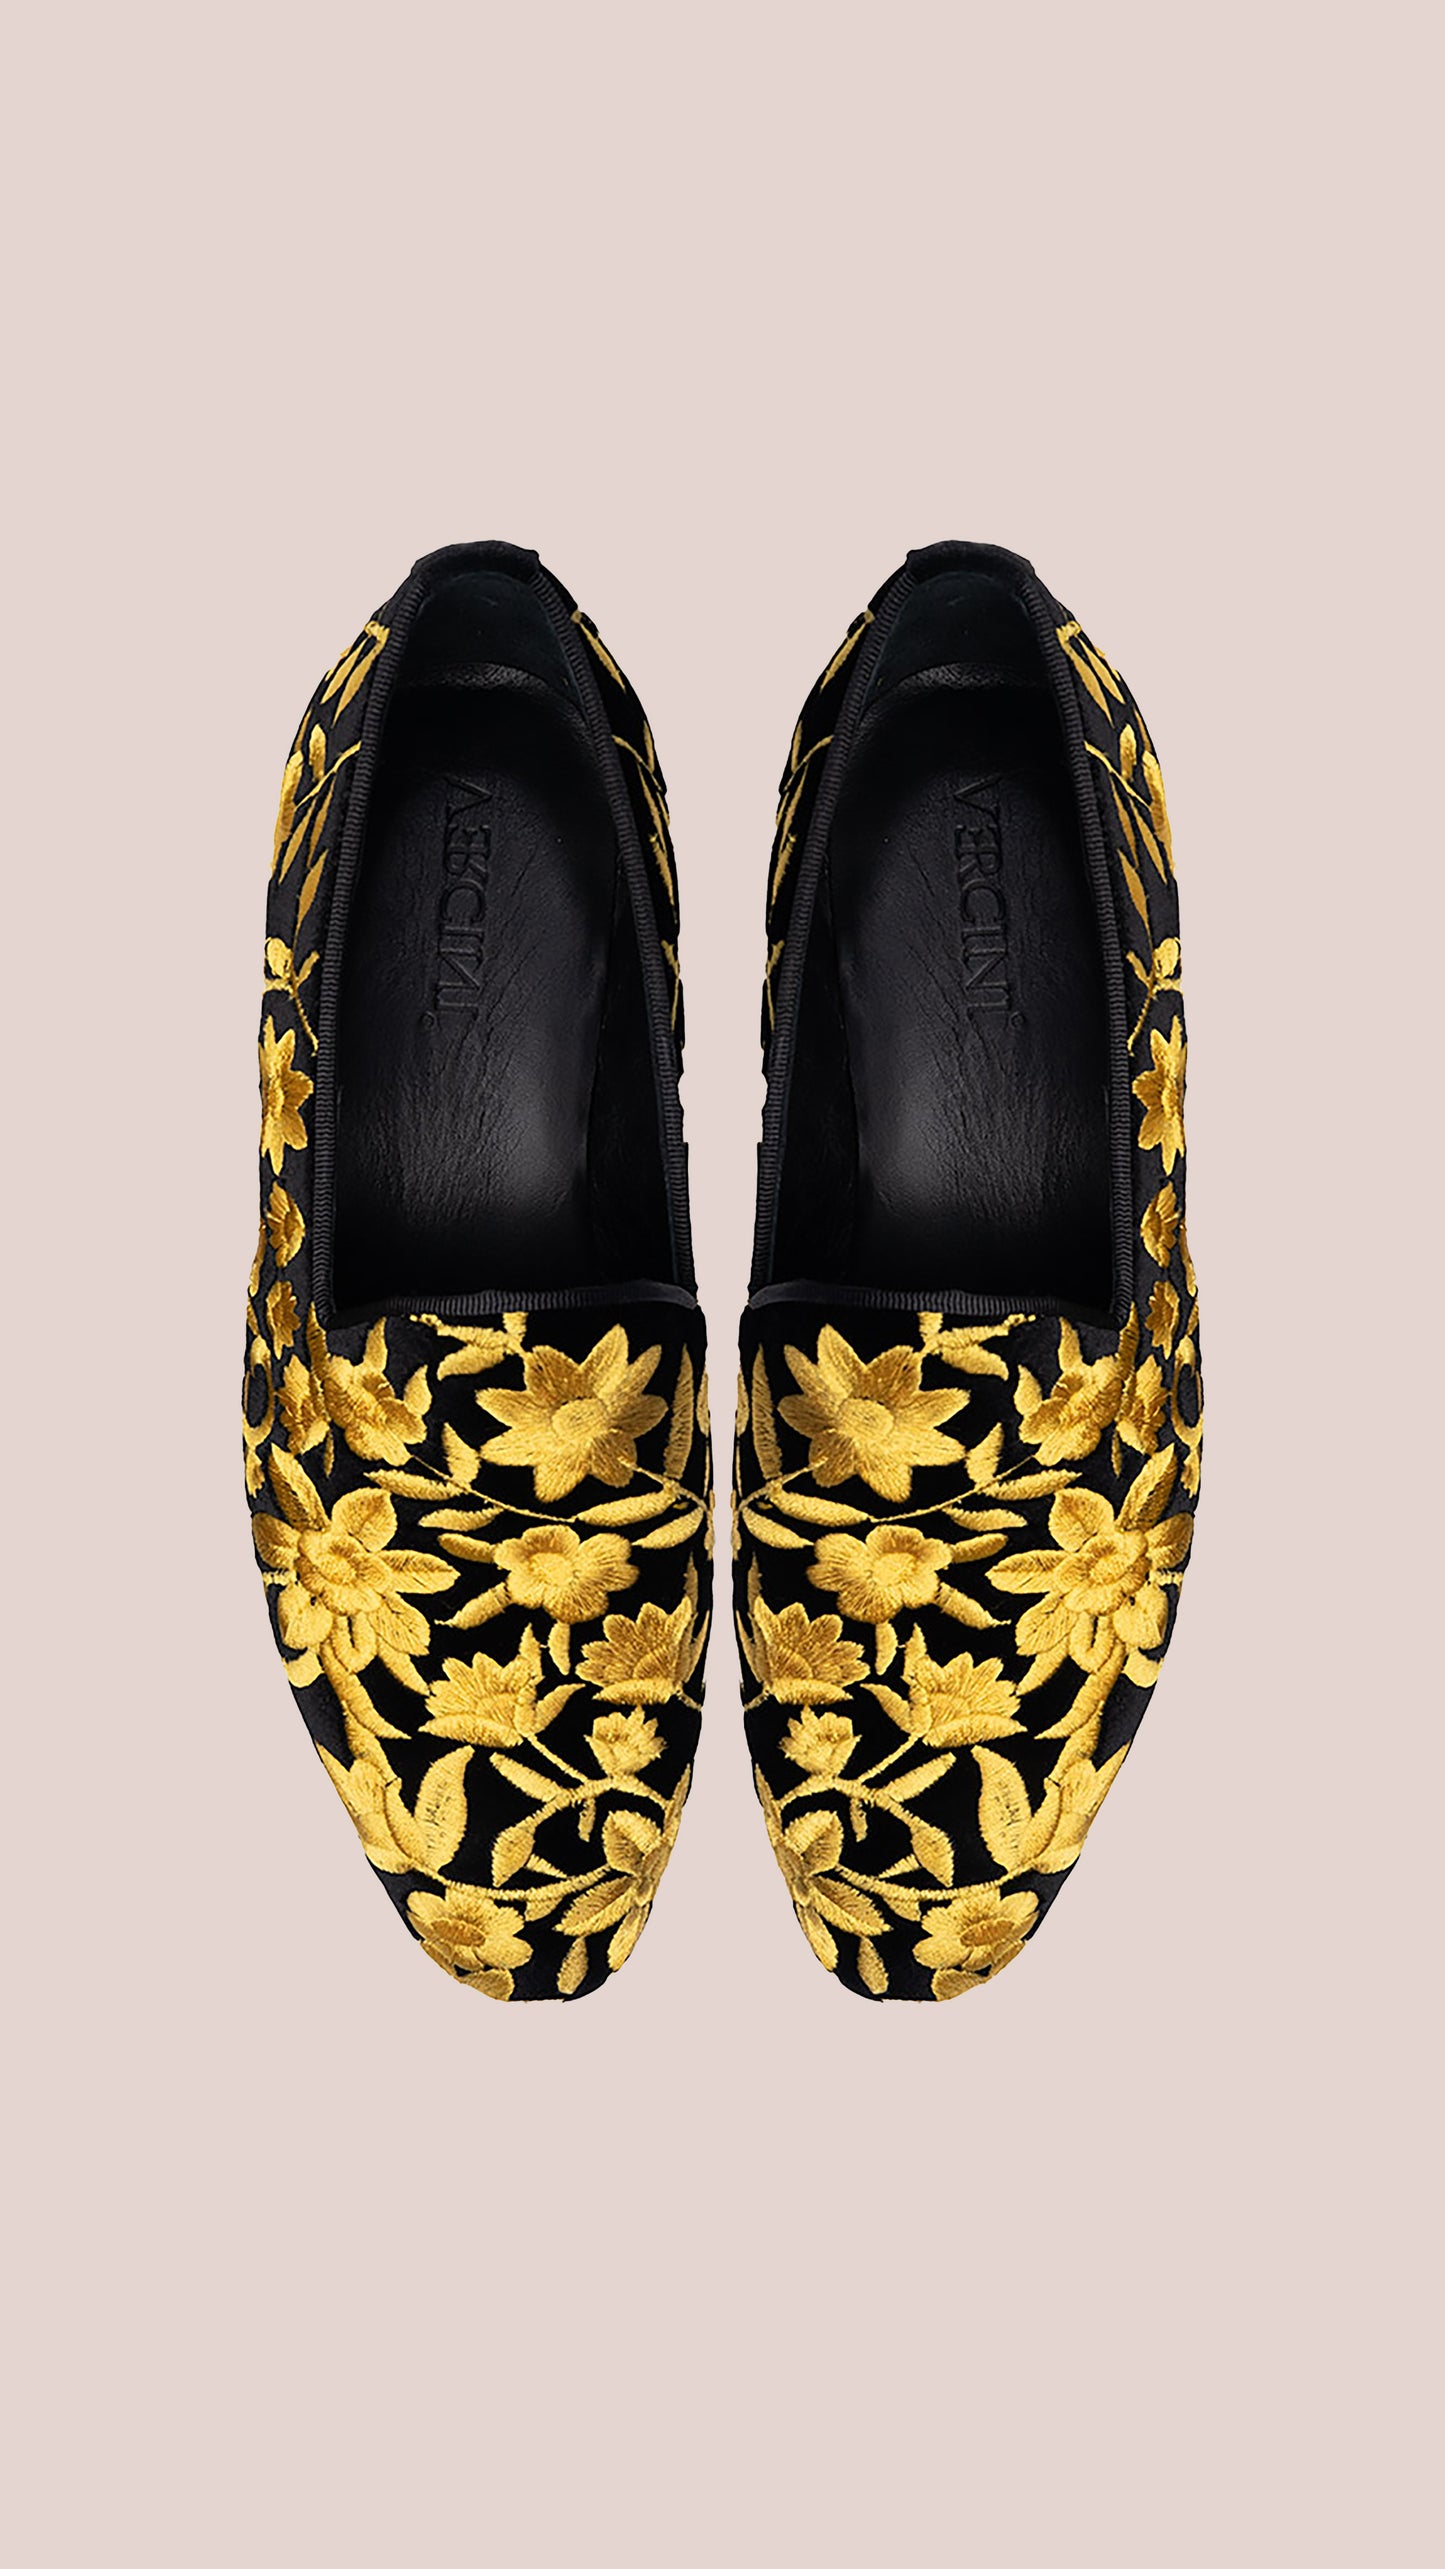 Yellow flower shoes SHOES Shoe Collection Vercini